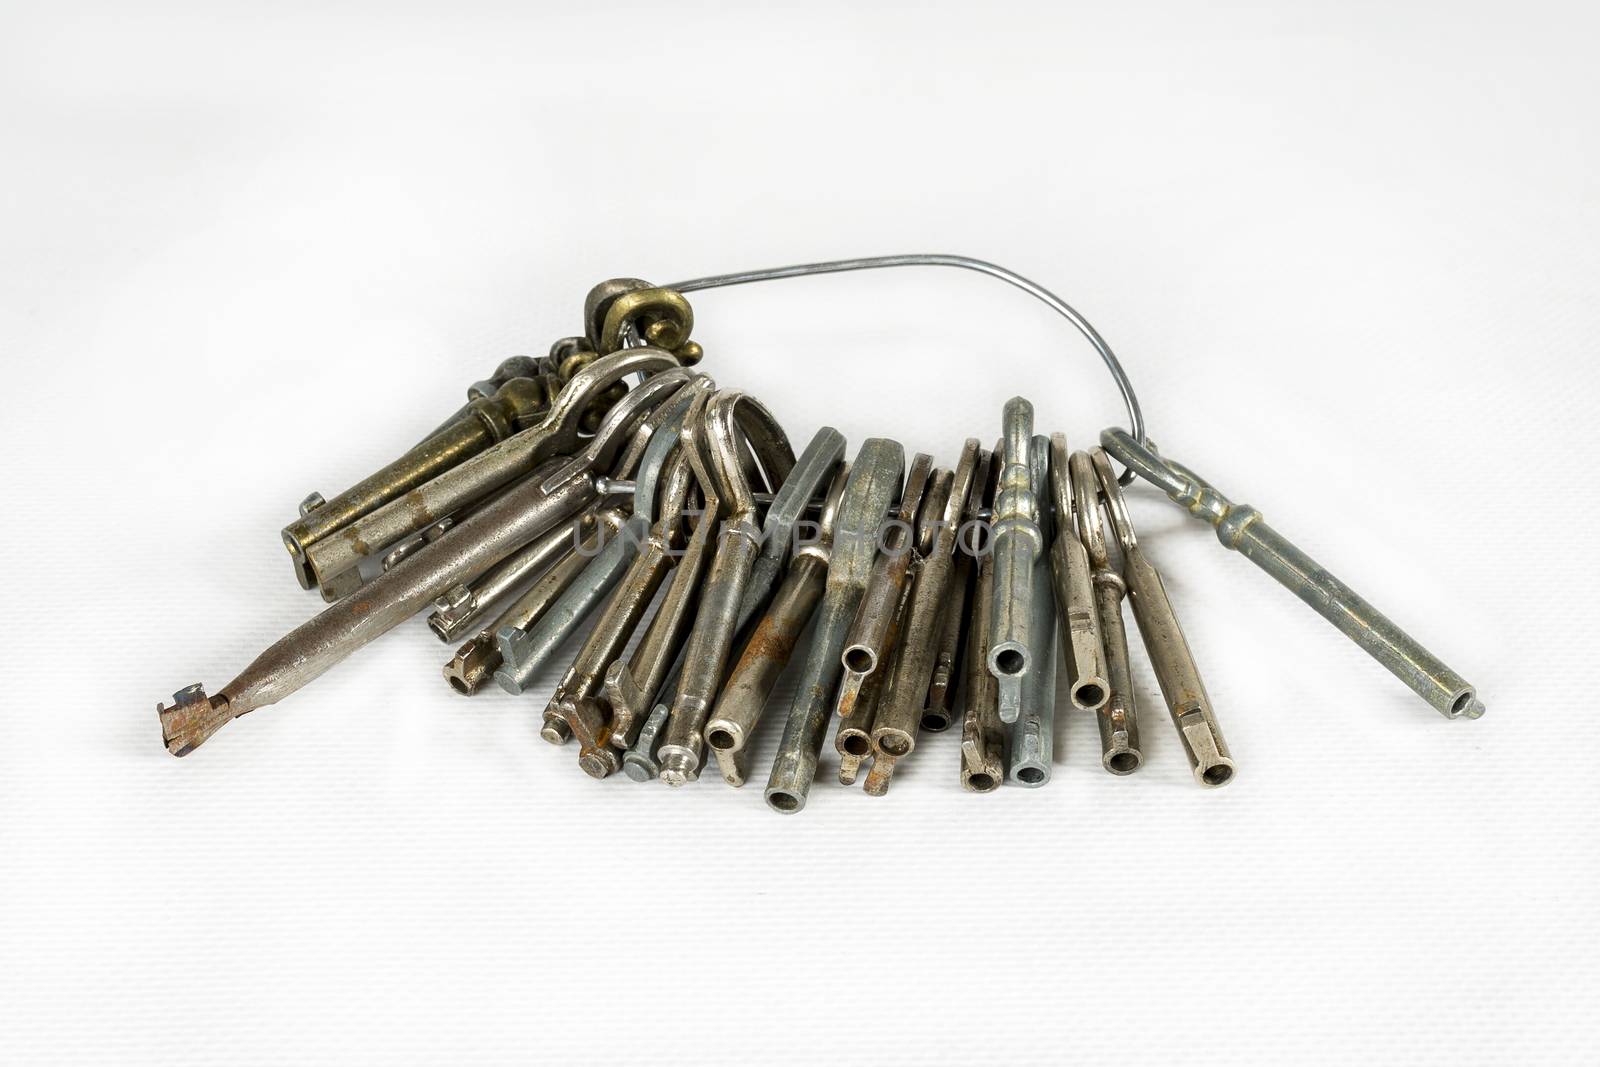 A set of old keys. Isolated over white background. View of many antique keys